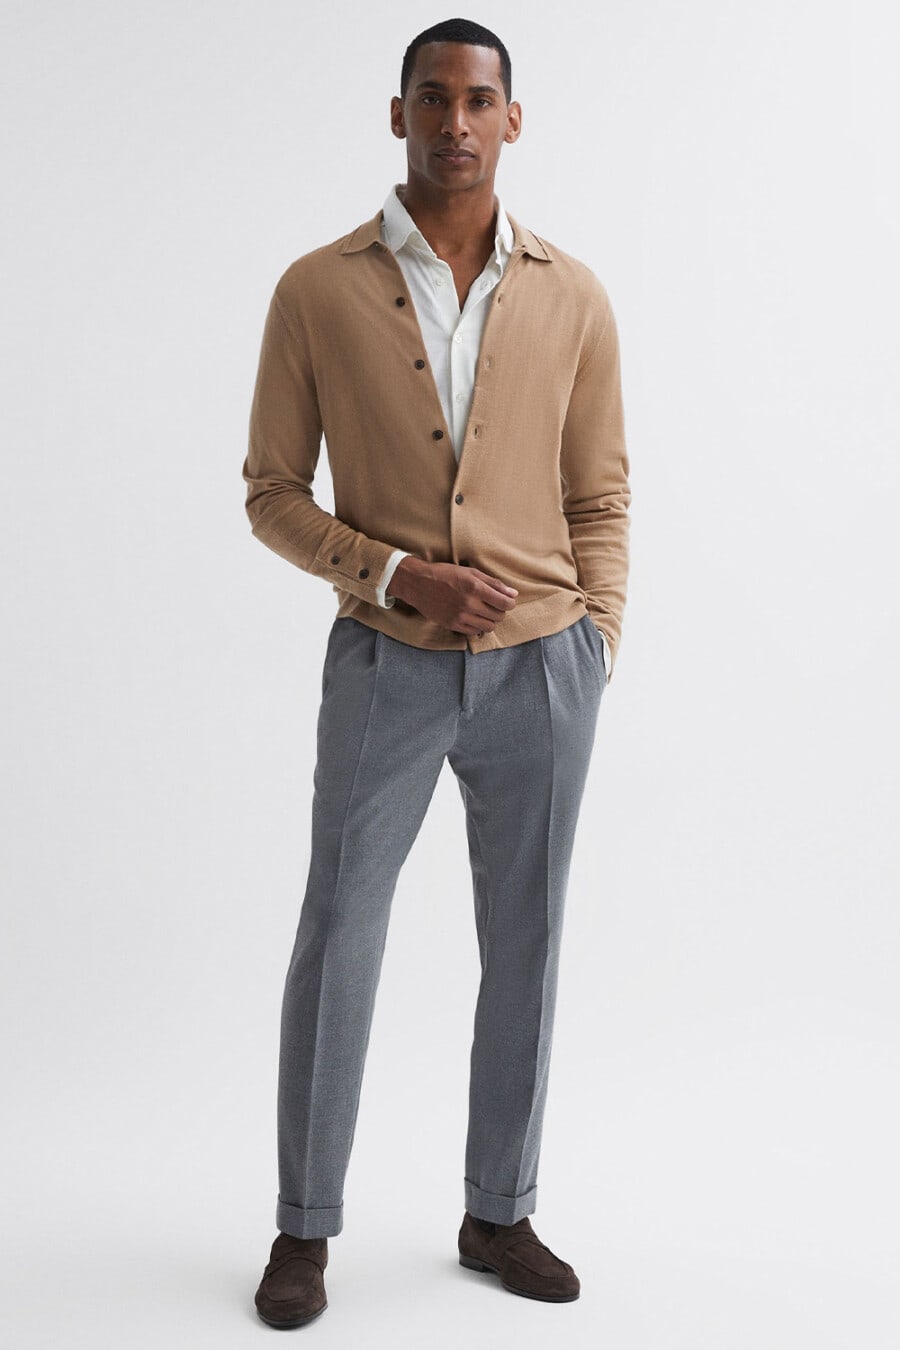 Men's grey turn-up tailored pants, white dress shirt, tan cardigan and brown suede penny loafers business casual outfit